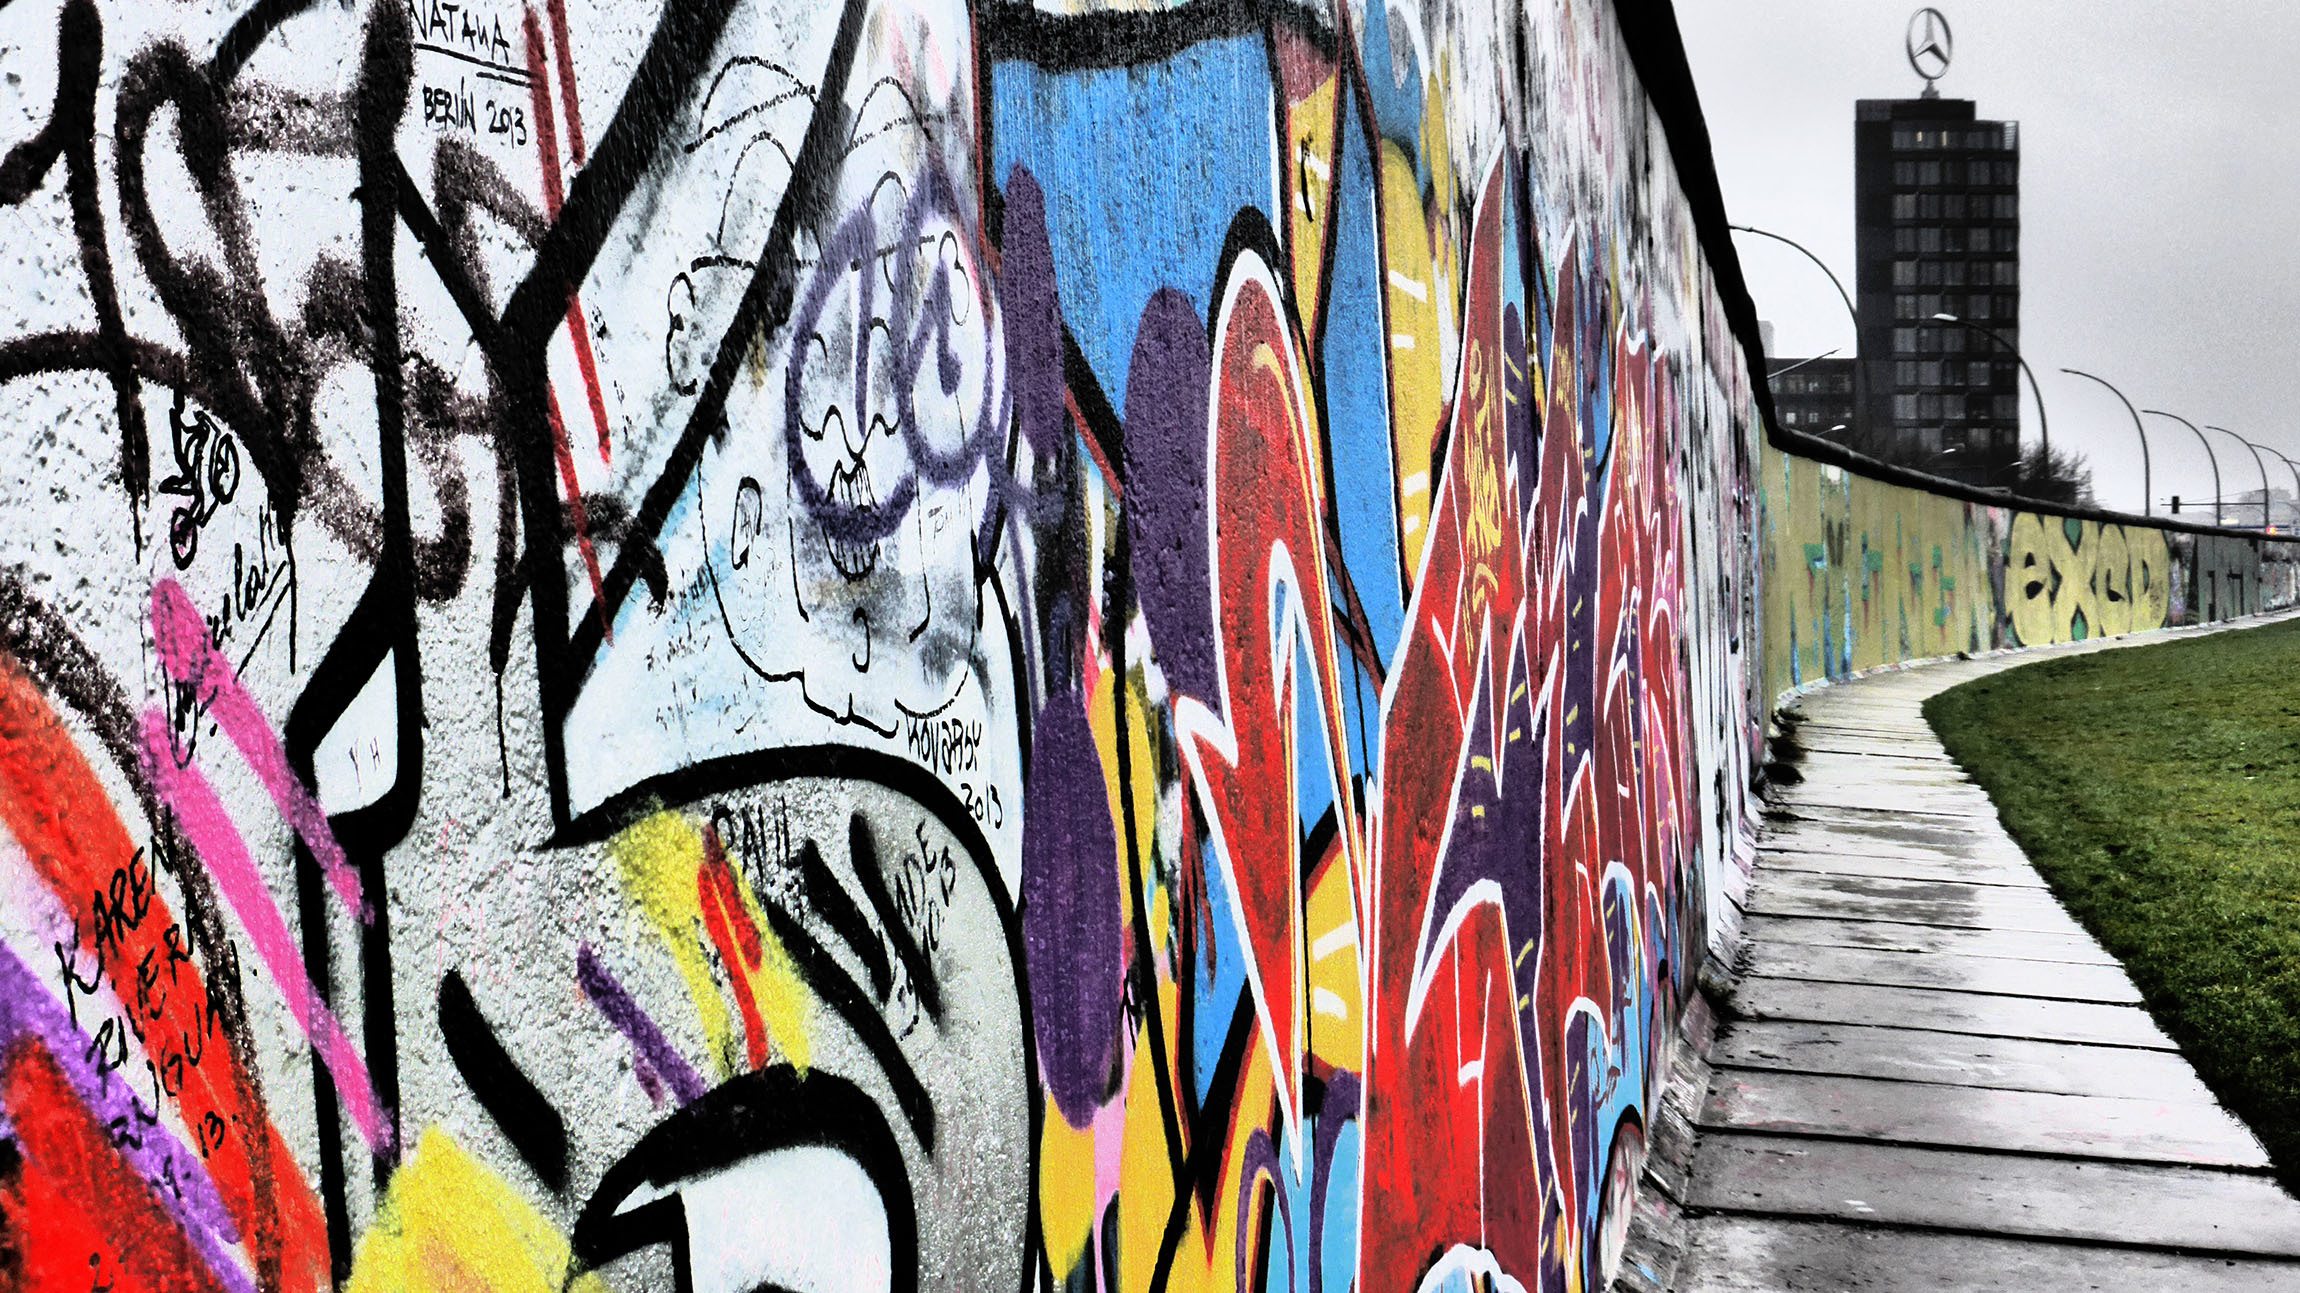 A section of the Berlin Wall in Berlin Germany